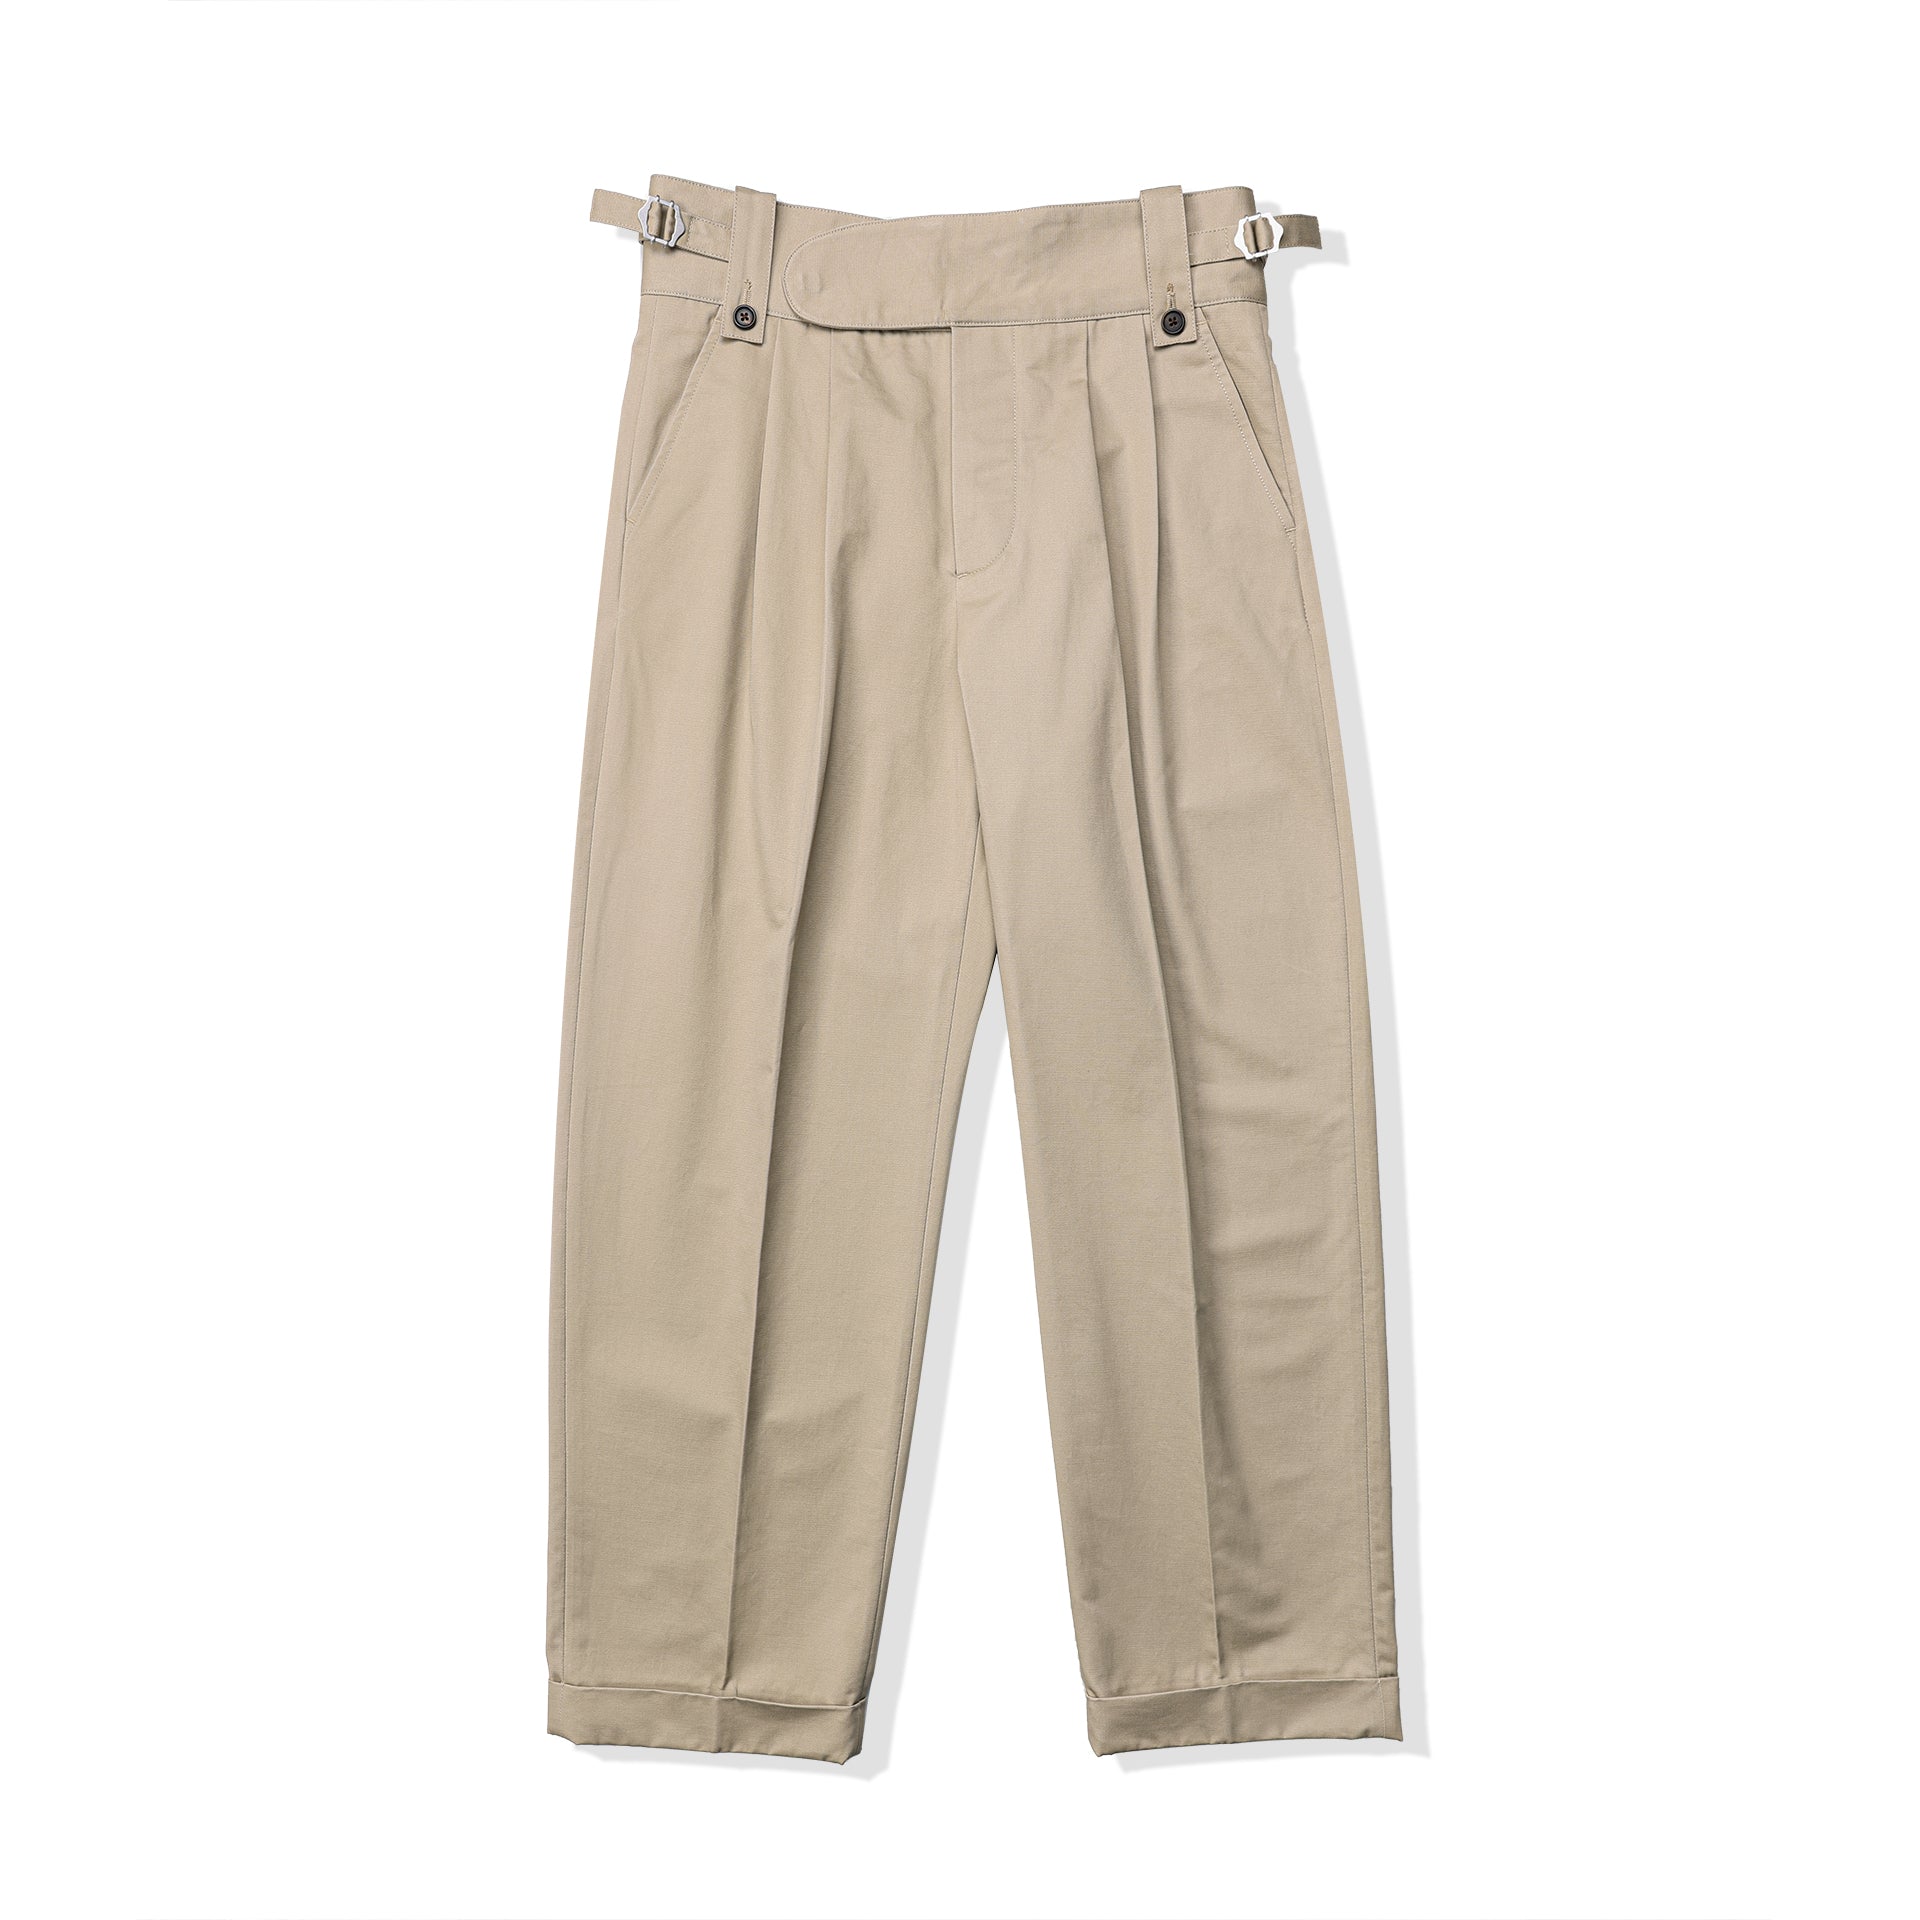 Red Wind High Waist Retro Tooling Pants for Men